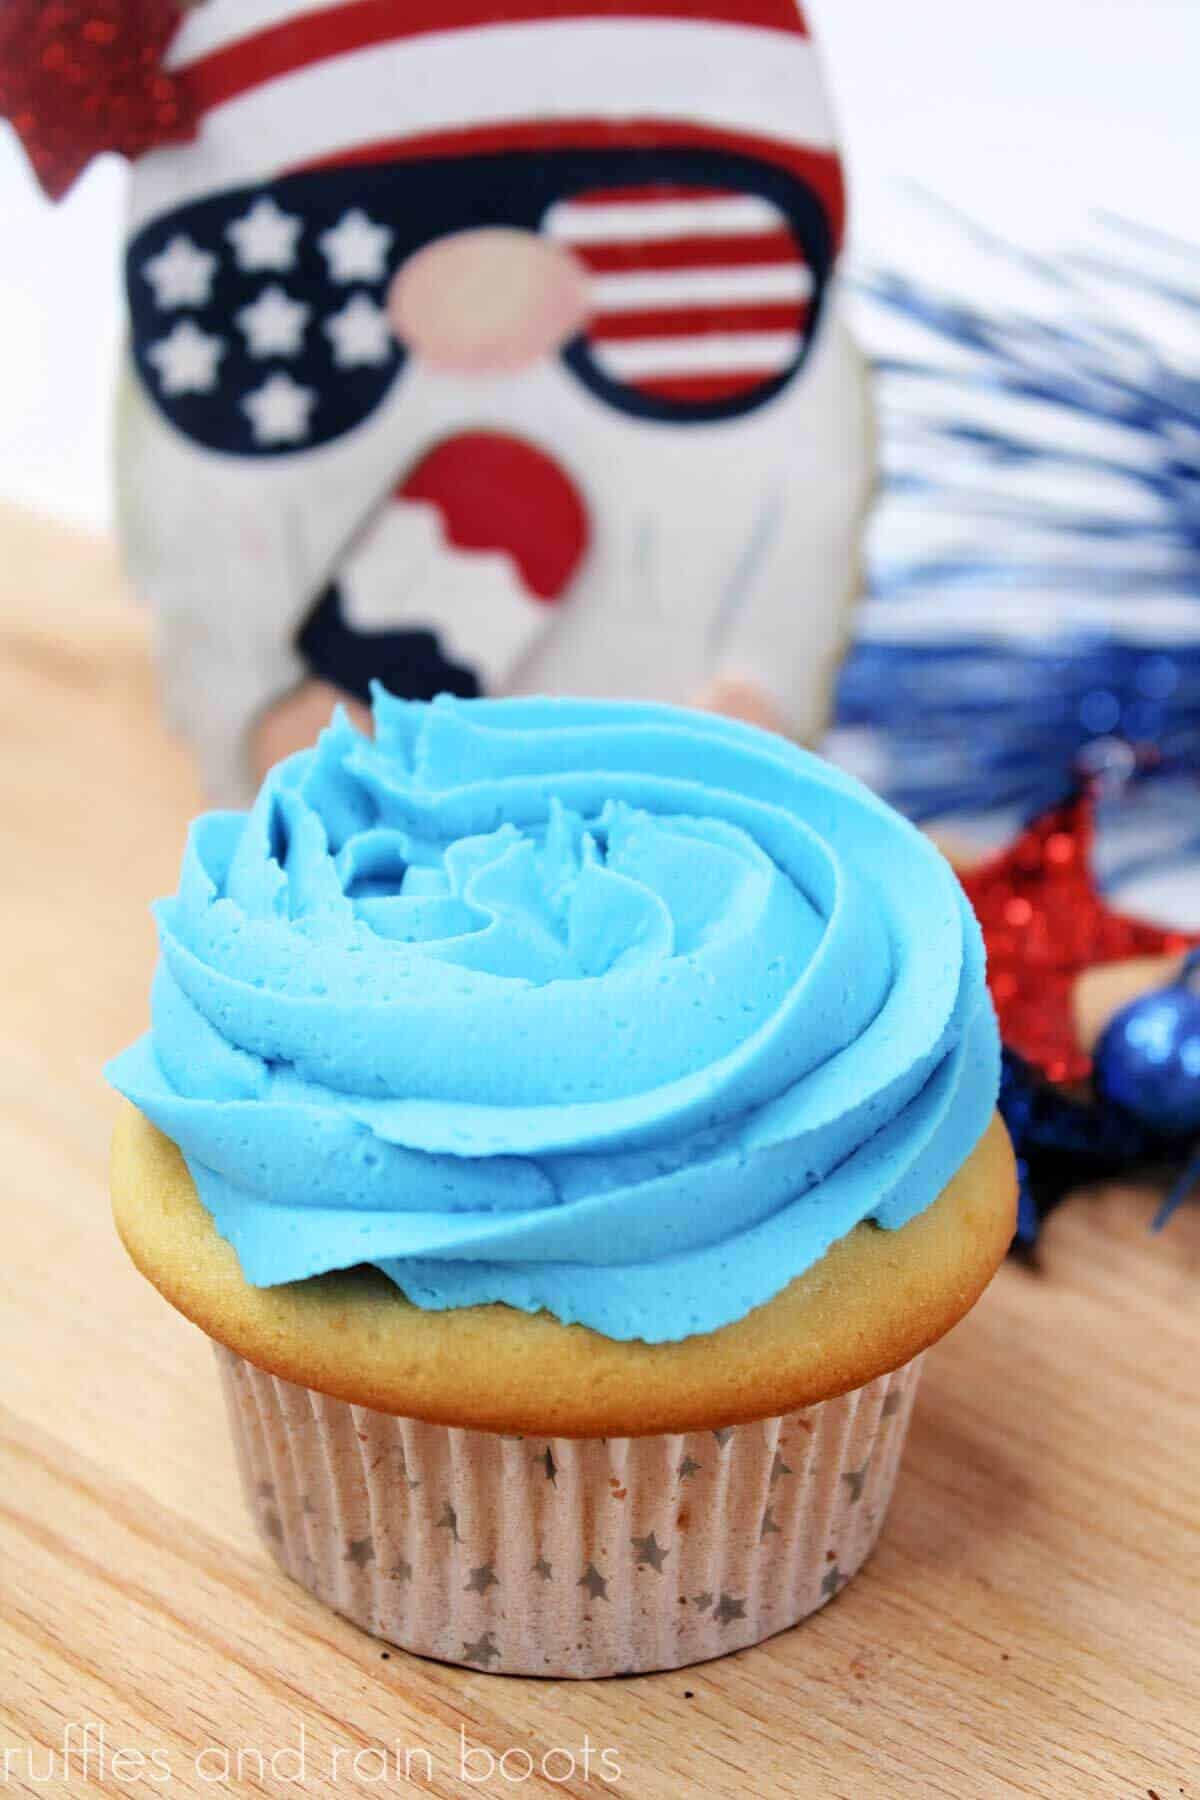 Vanilla cupcake with one layer of blue buttercream frosting with a patriotic gnome in the background.